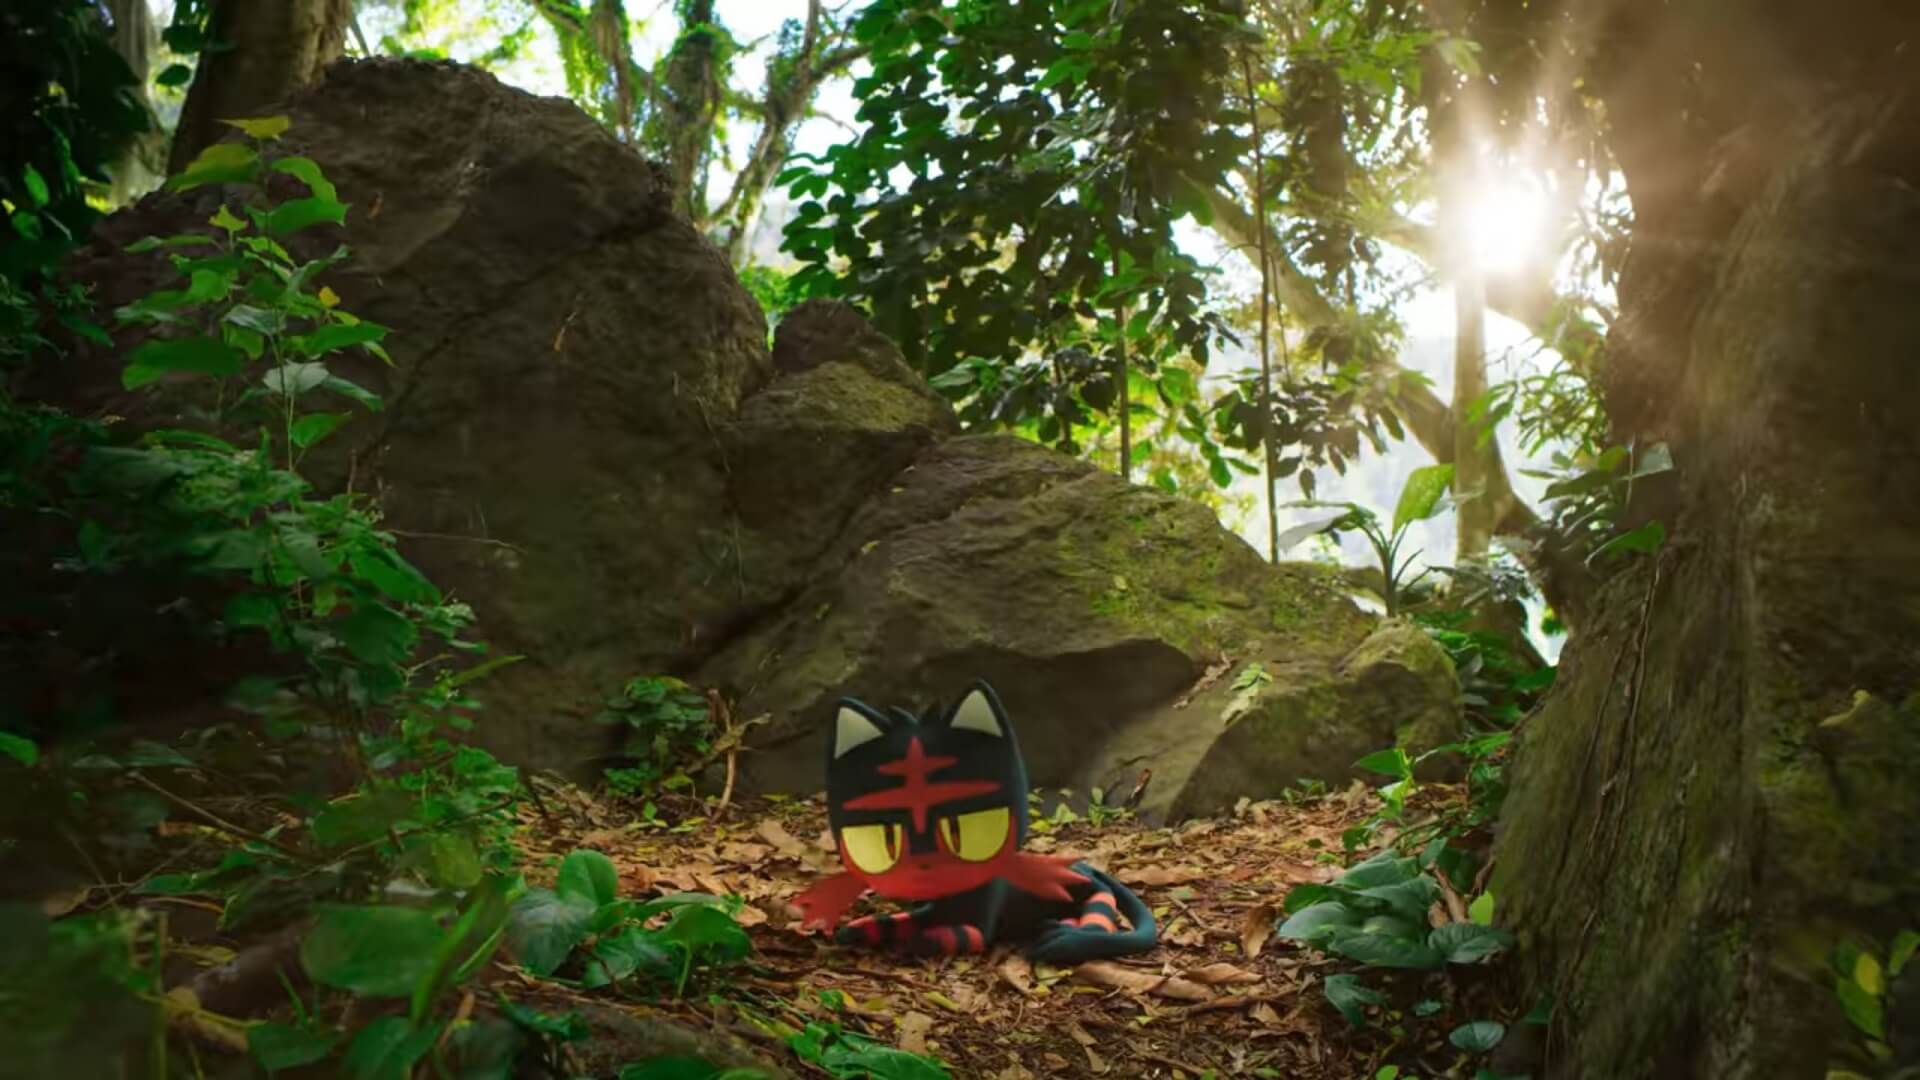 Litten in Pokemon Go, which has recently had its services halted in Russia